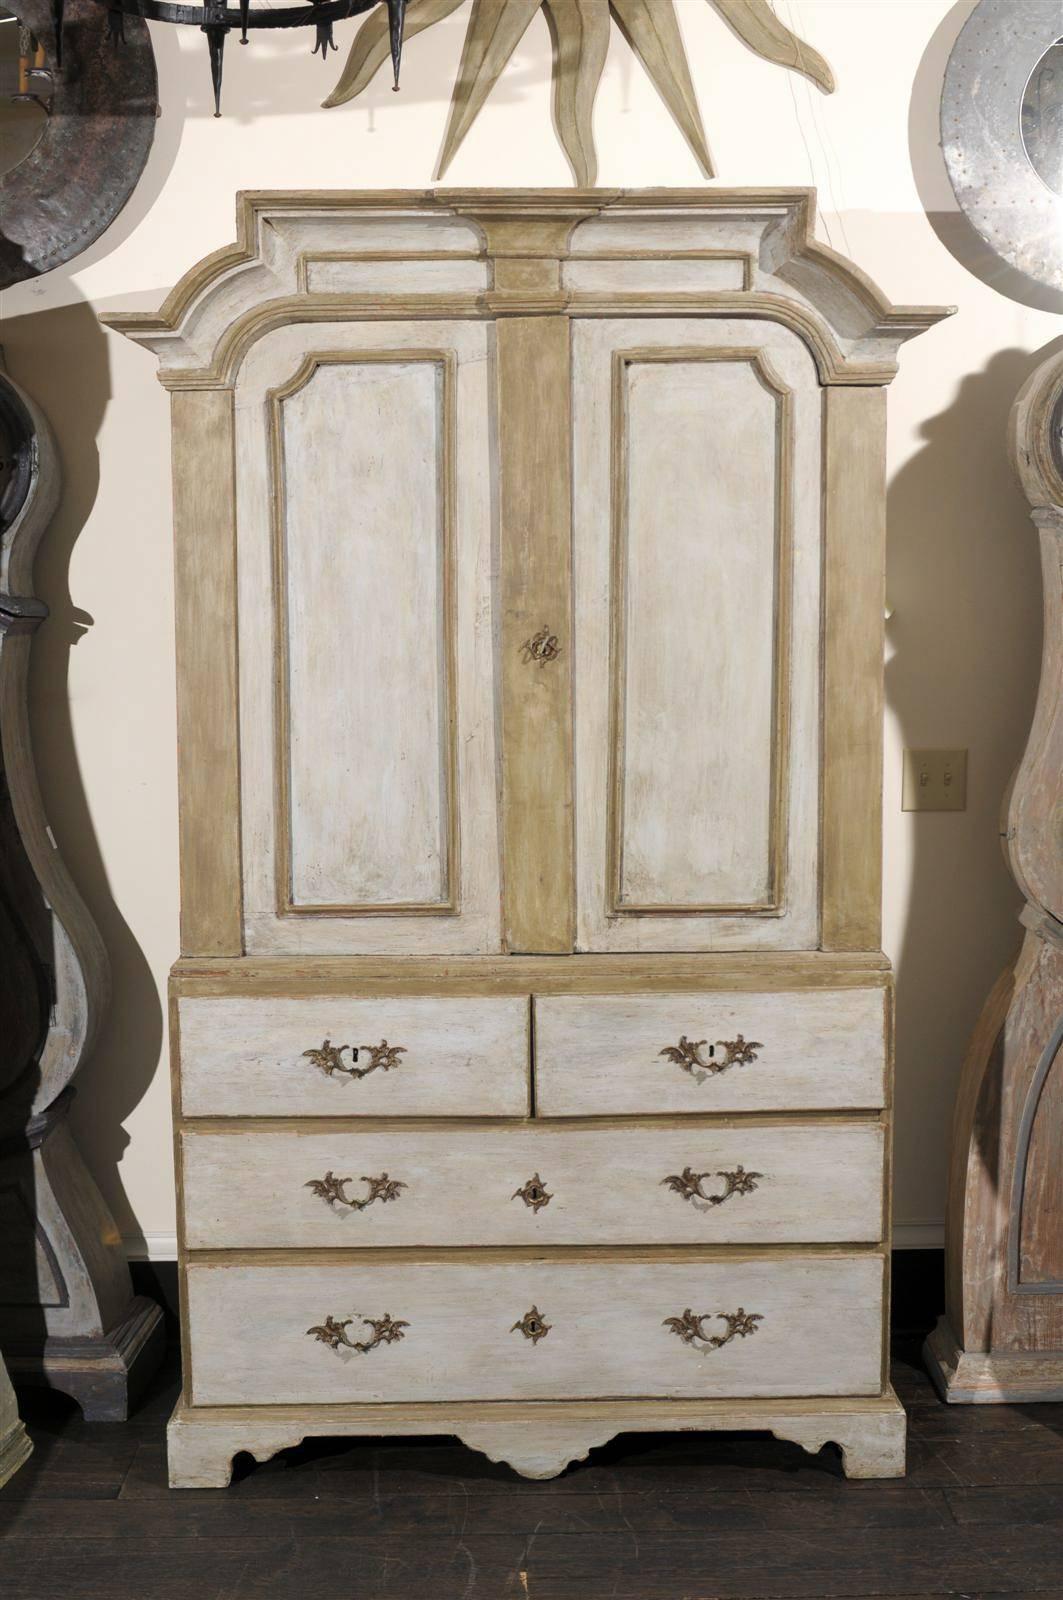 An 18th century Swedish period Rococo painted wood cabinet or linen press with two doors over four drawers, inner shelves, wonderful pediment and bracket feet.